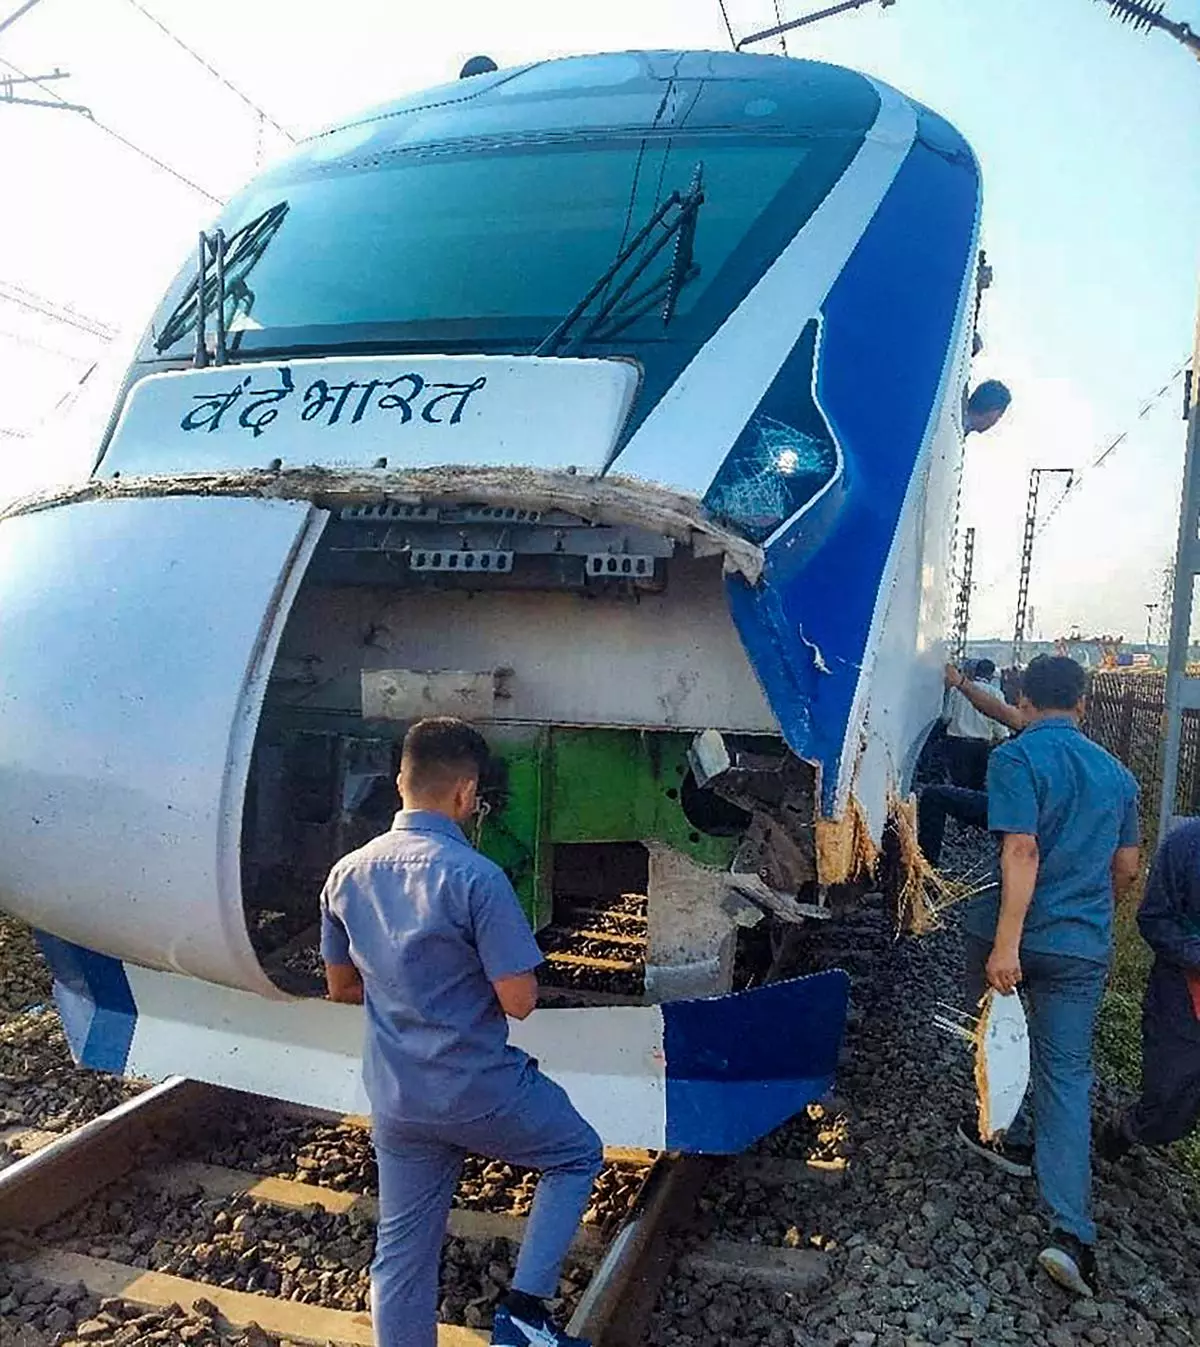 Vande Bharat Express train, running between Mumbai Central and Gandhinagar, suffers damages after a collision with cattle on October 29, 2022